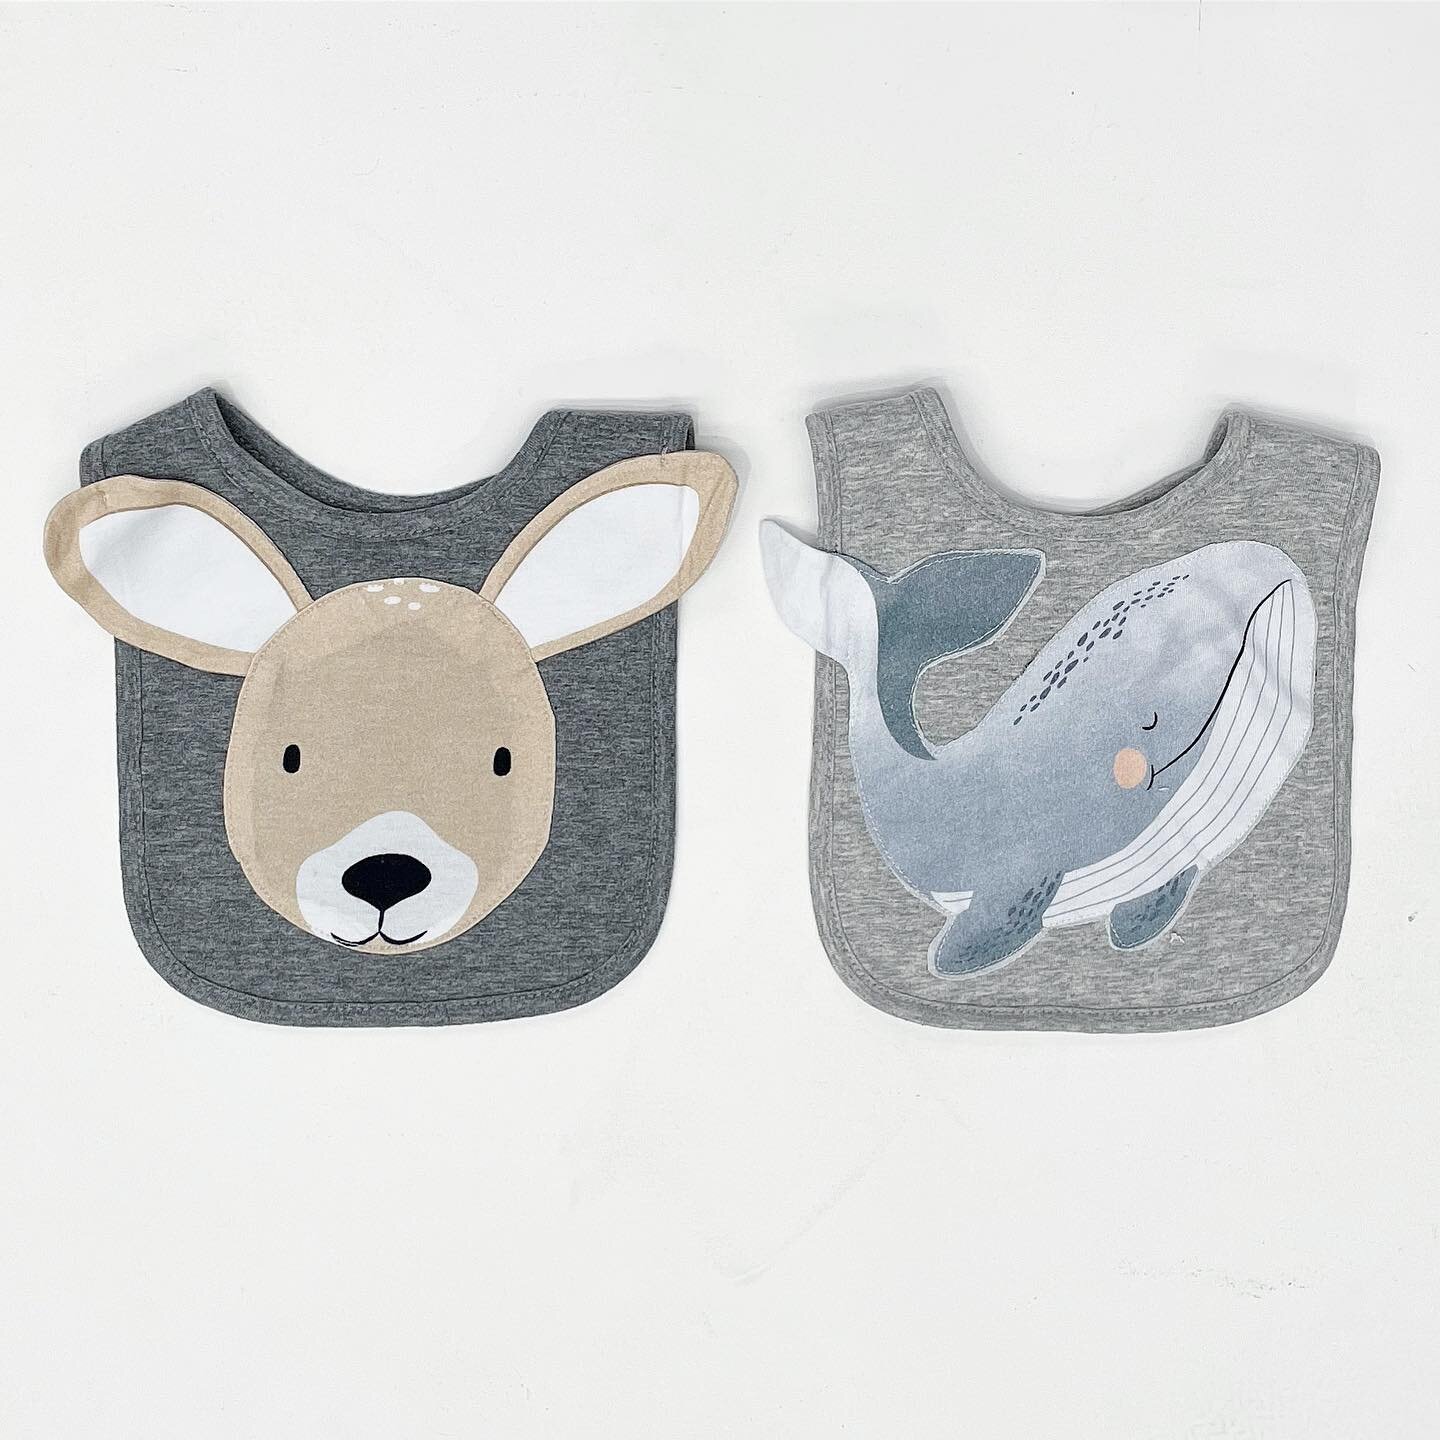 LOVE| The sweetest bibs that are practical yet stylish, you can&rsquo;t go wrong 🐳 🦘 #welove